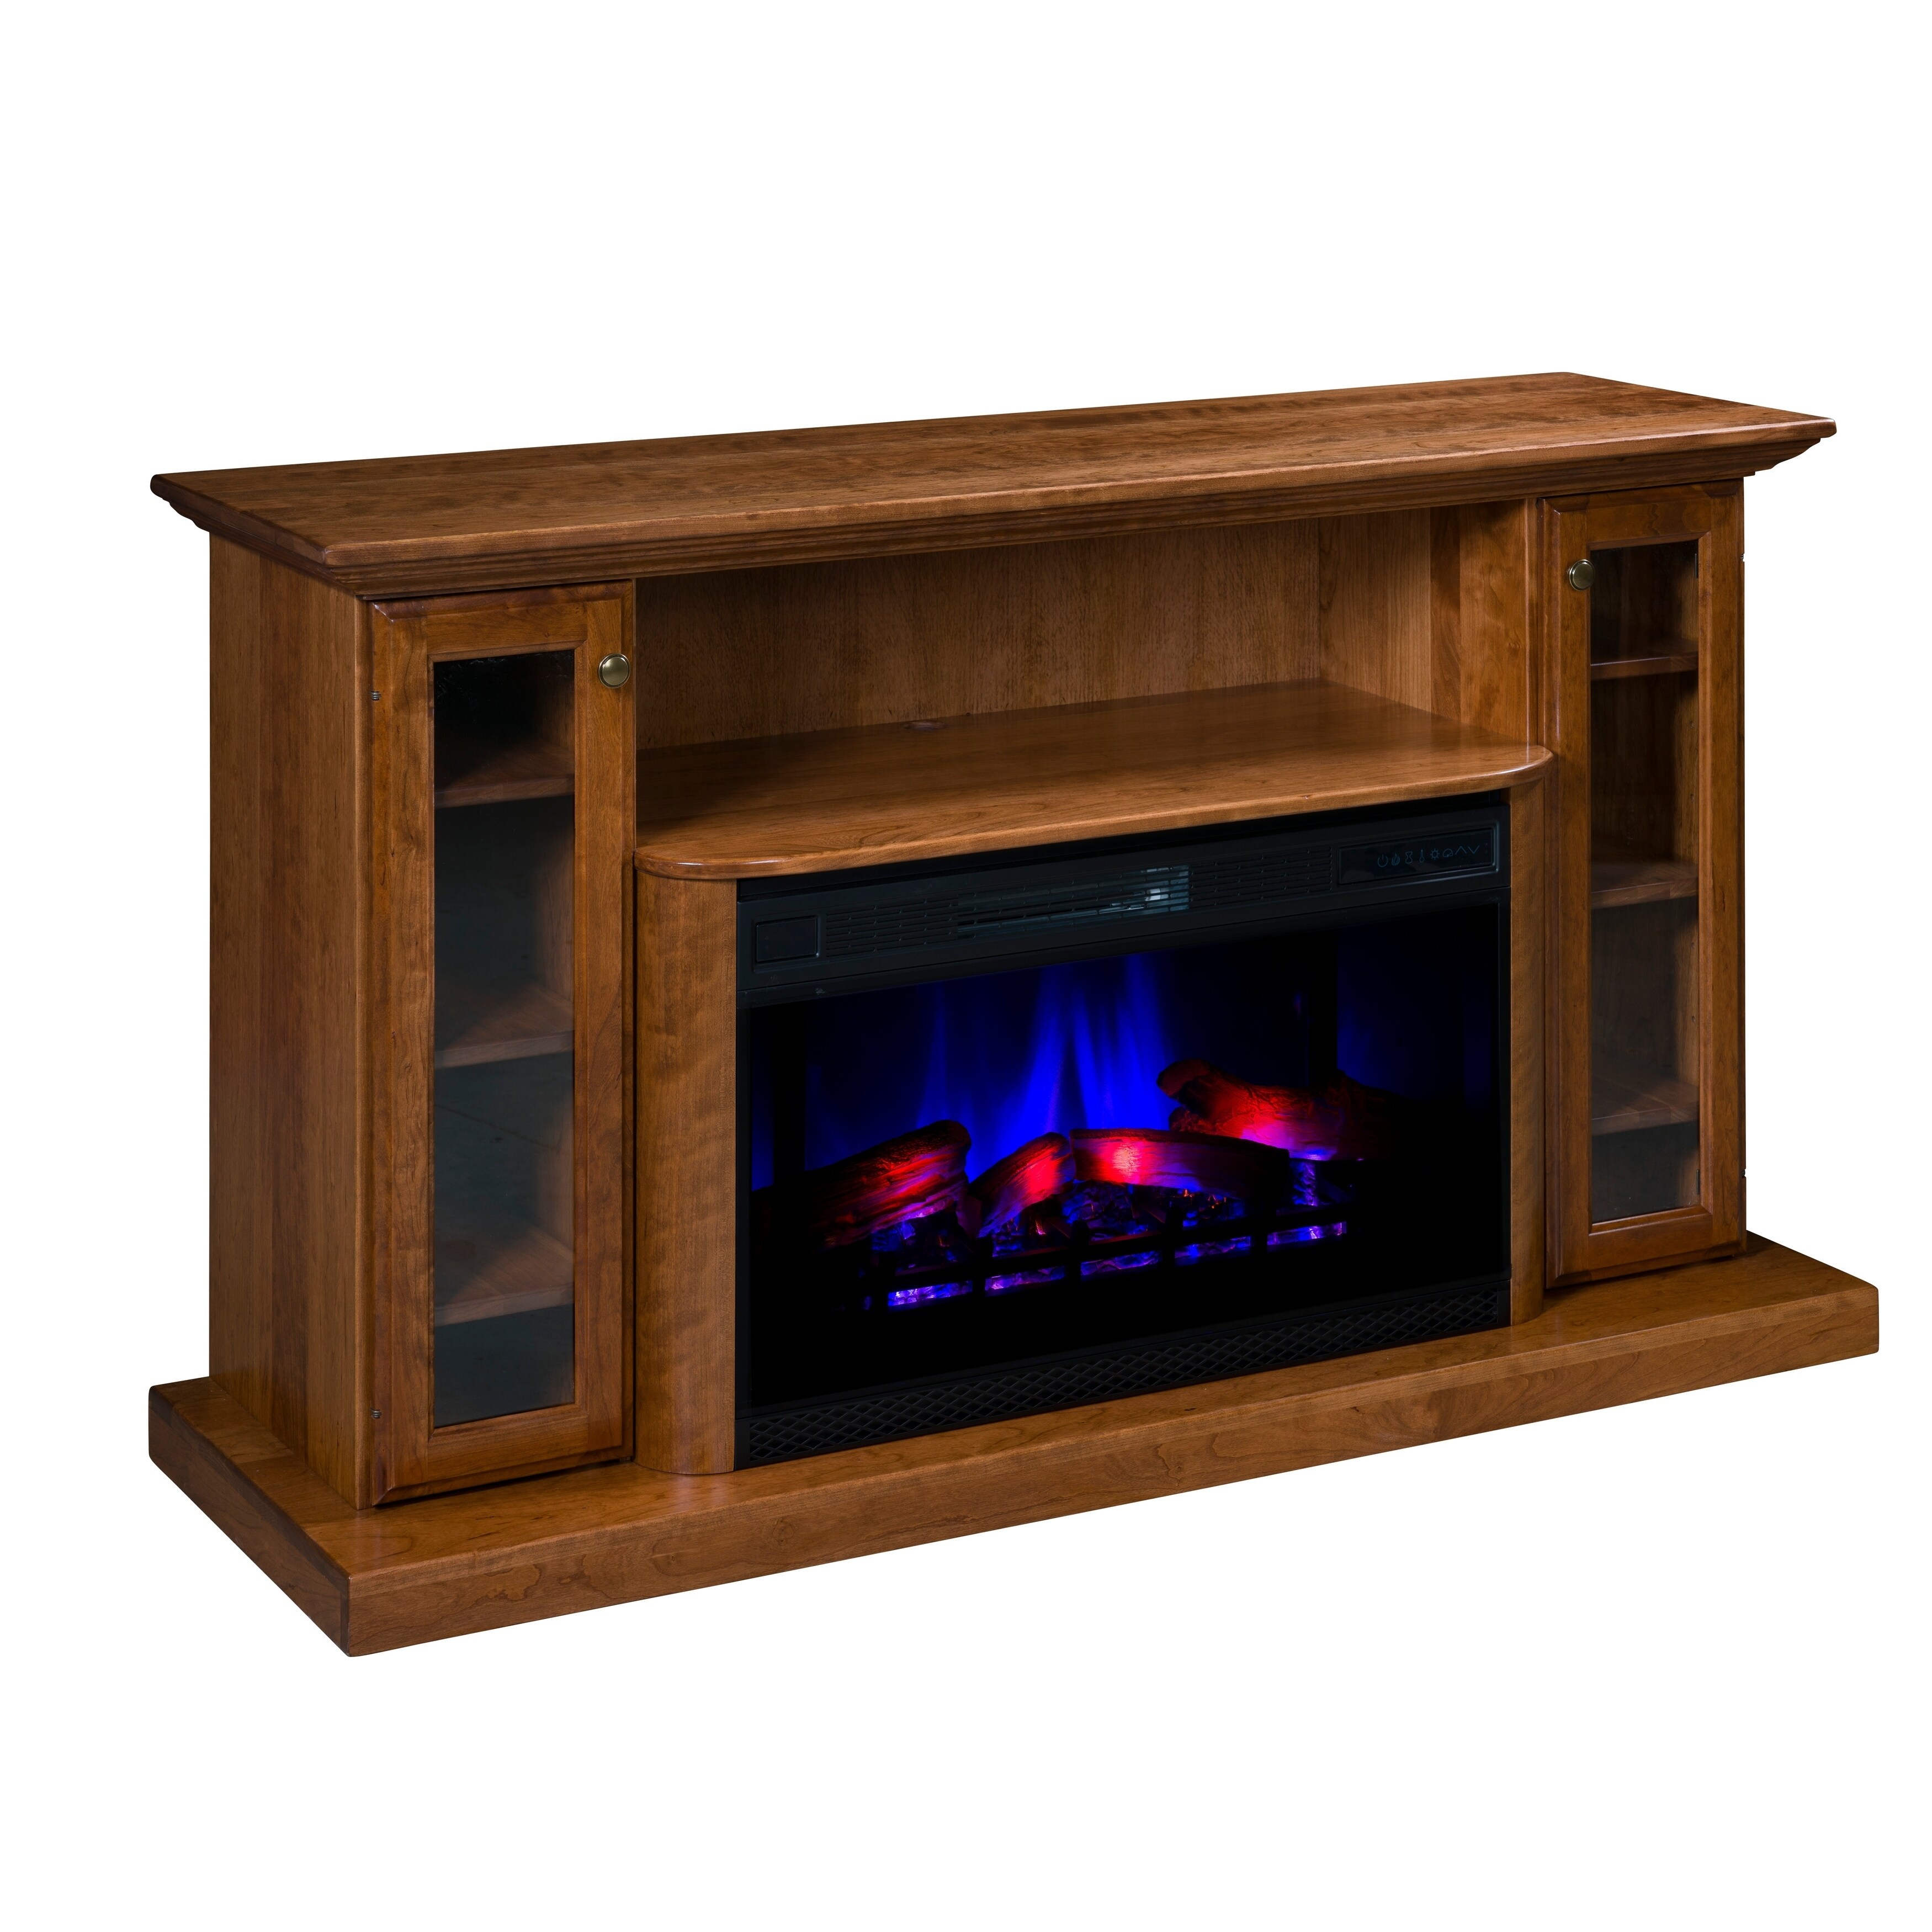 Shop Riverdale 64 Led Fireplace With Shelf And Cabinets Free